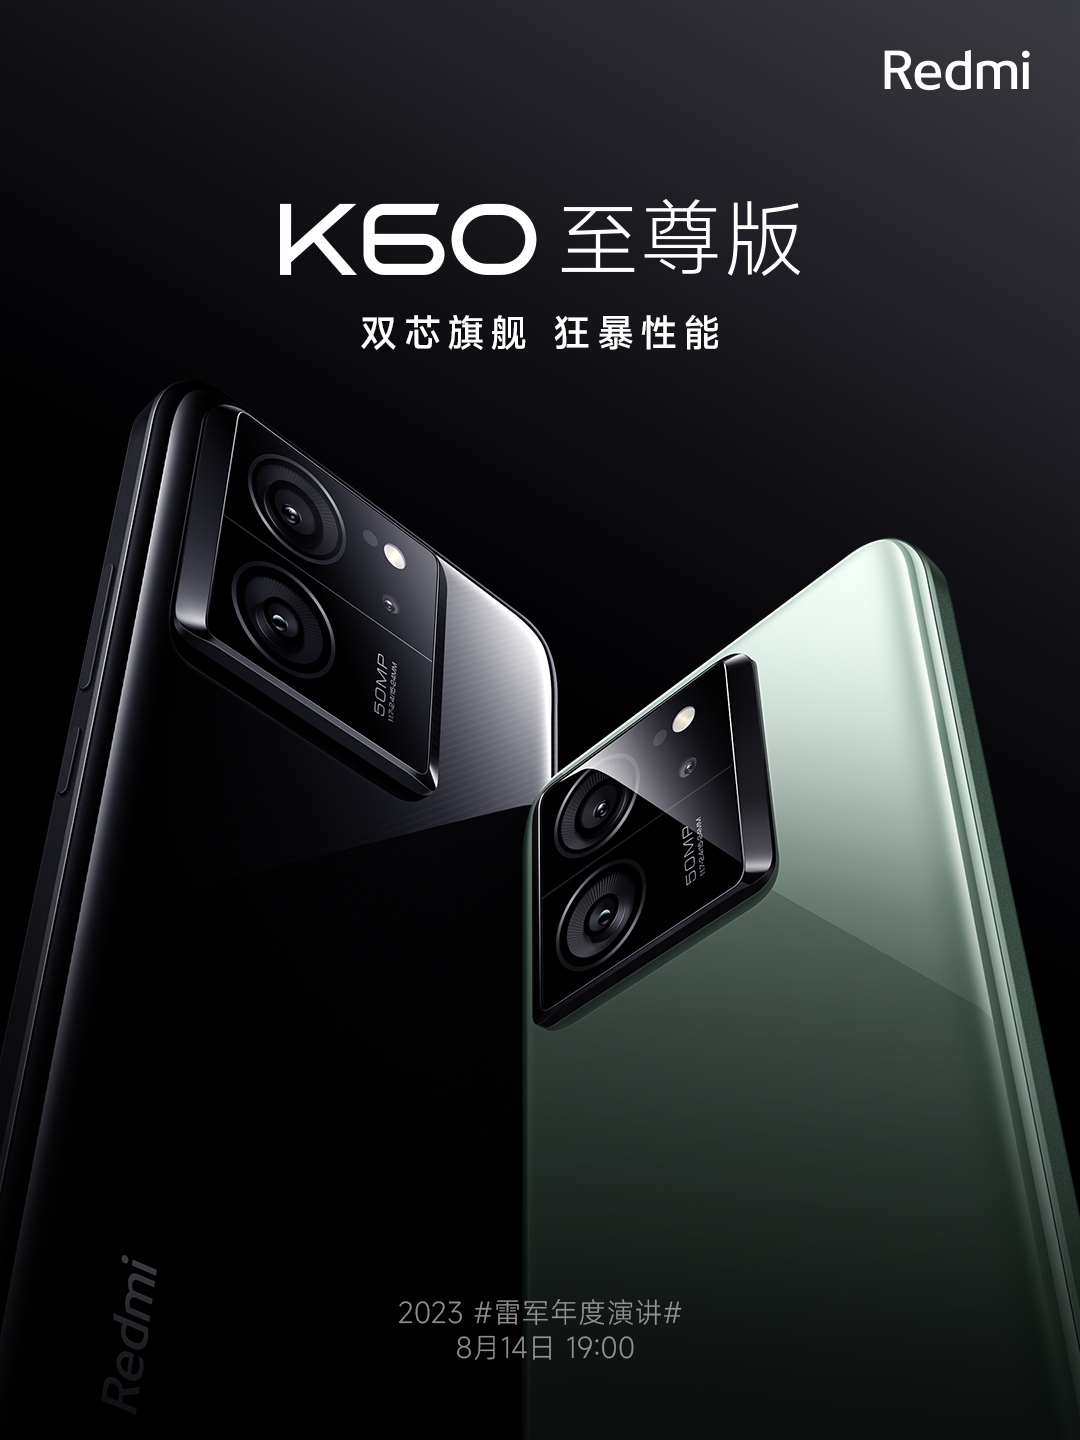 Xiaomi is bringing Redmi K60 Ultra at the August 14 event